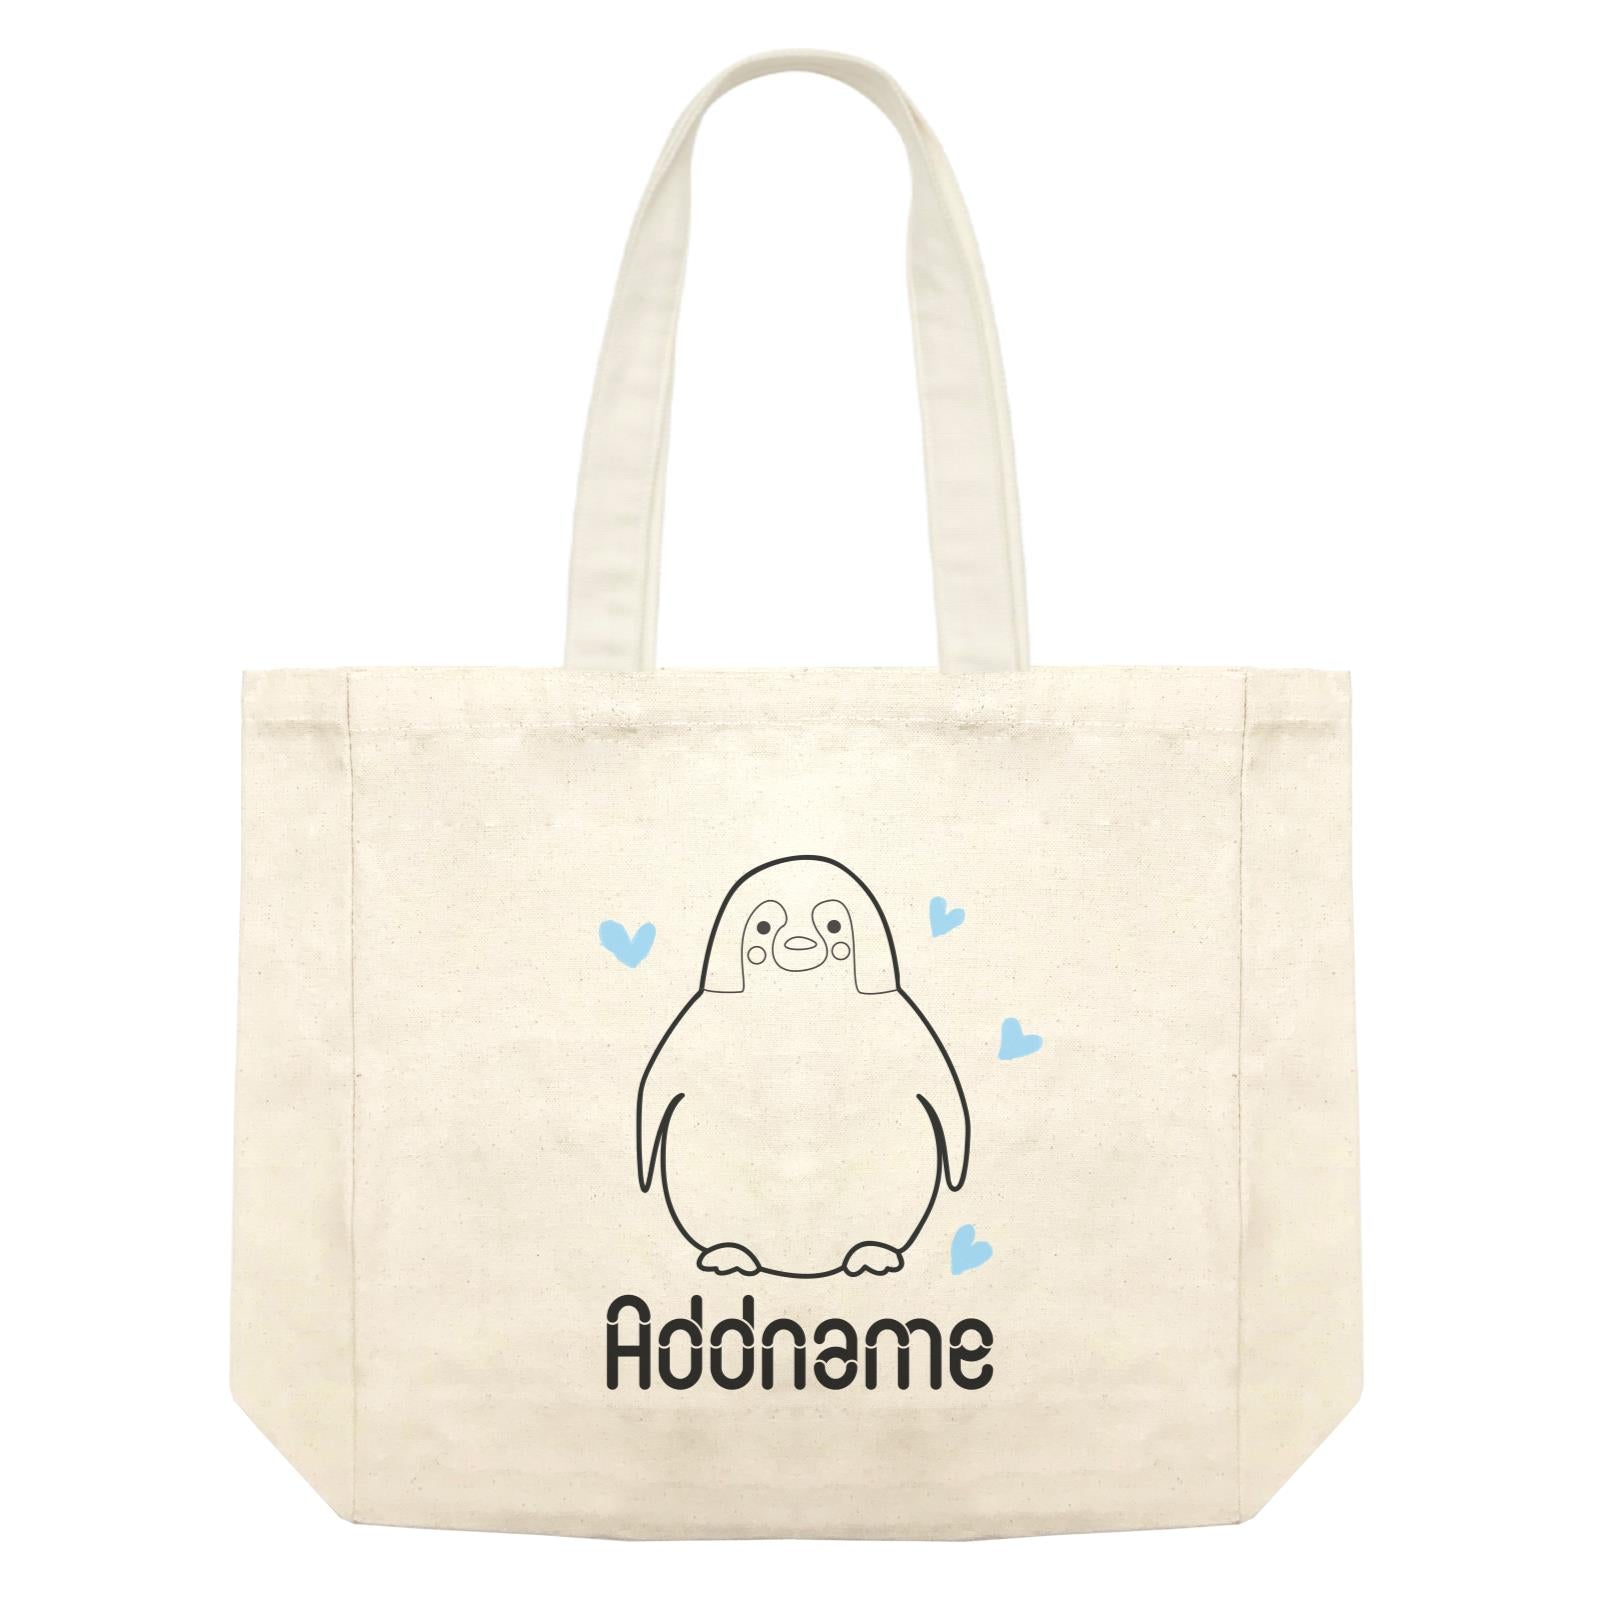 Coloring Outline Cute Hand Drawn Animals Cute Penguin Addname Shopping Bag